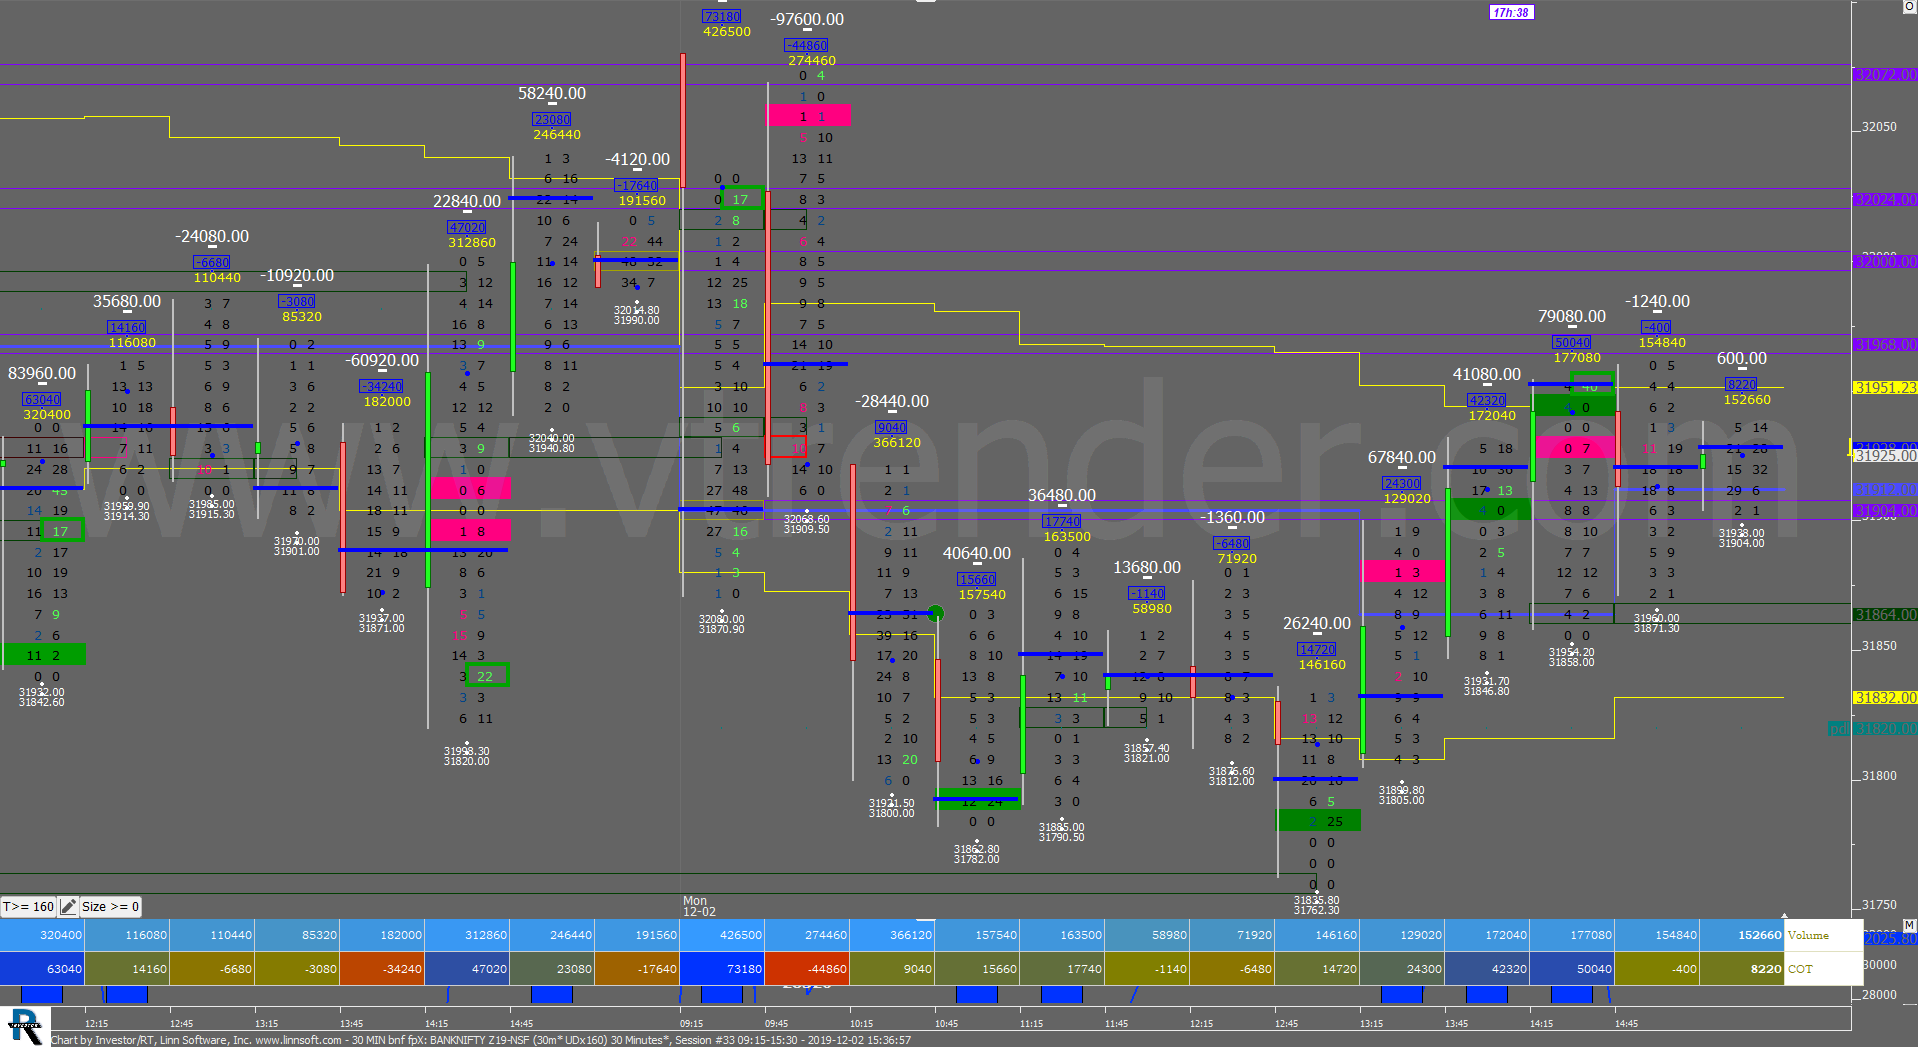 30 Min Bnf Fpx Order Flow Charts Dated 2Nd Dec Banknifty Futures, Day Trading, Intraday Trading, Intraday Trading Strategies, Nifty Futures, Order Flow Analysis, Support And Resistance, Trading Strategies, Volume Profile Trading